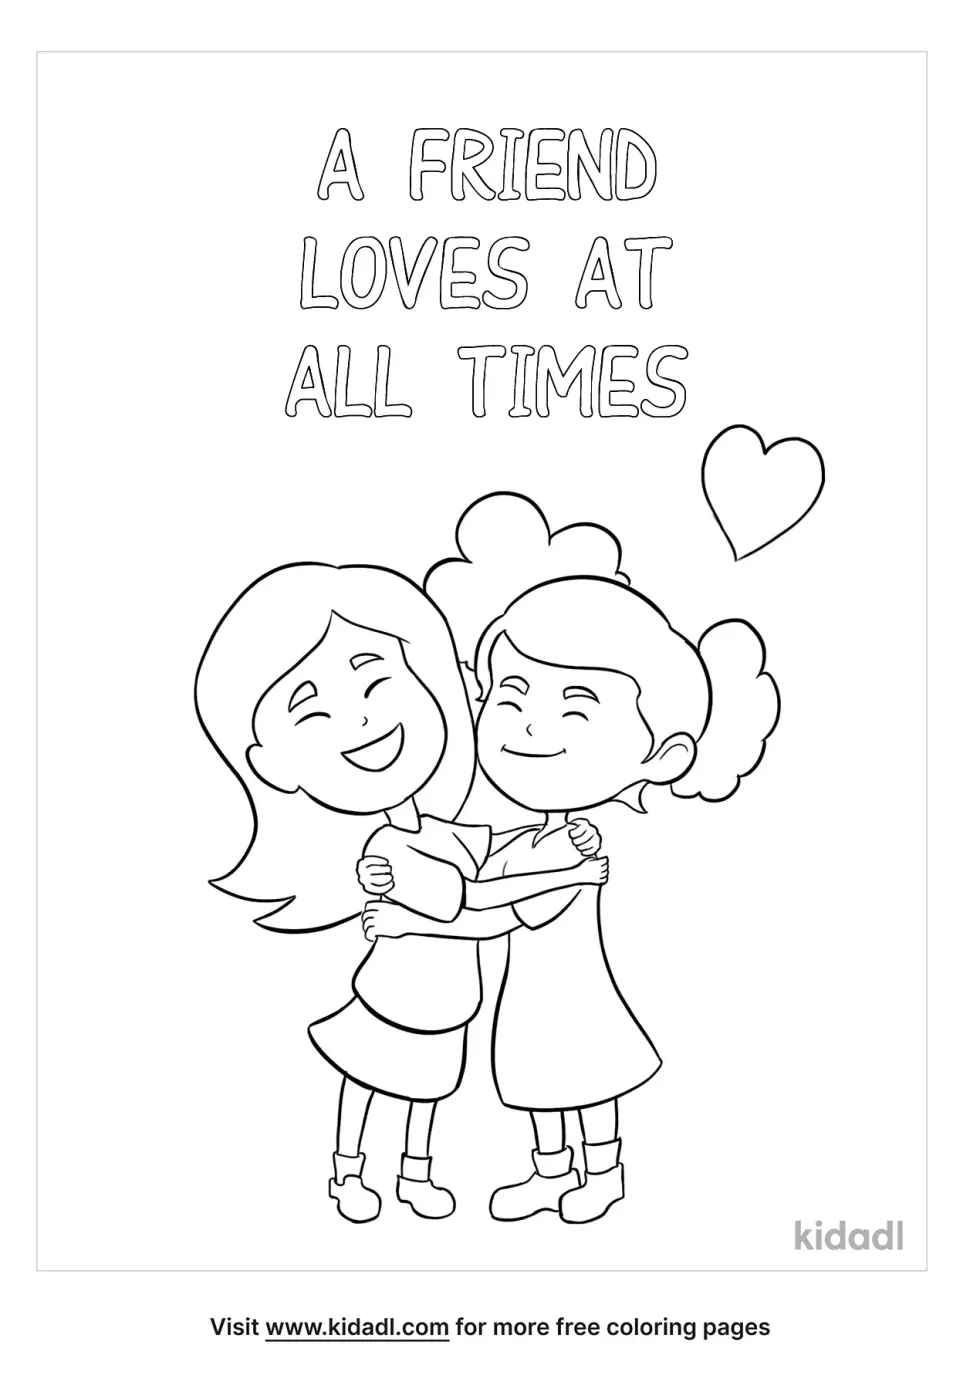 A Friend Loves At All Times Coloring Page